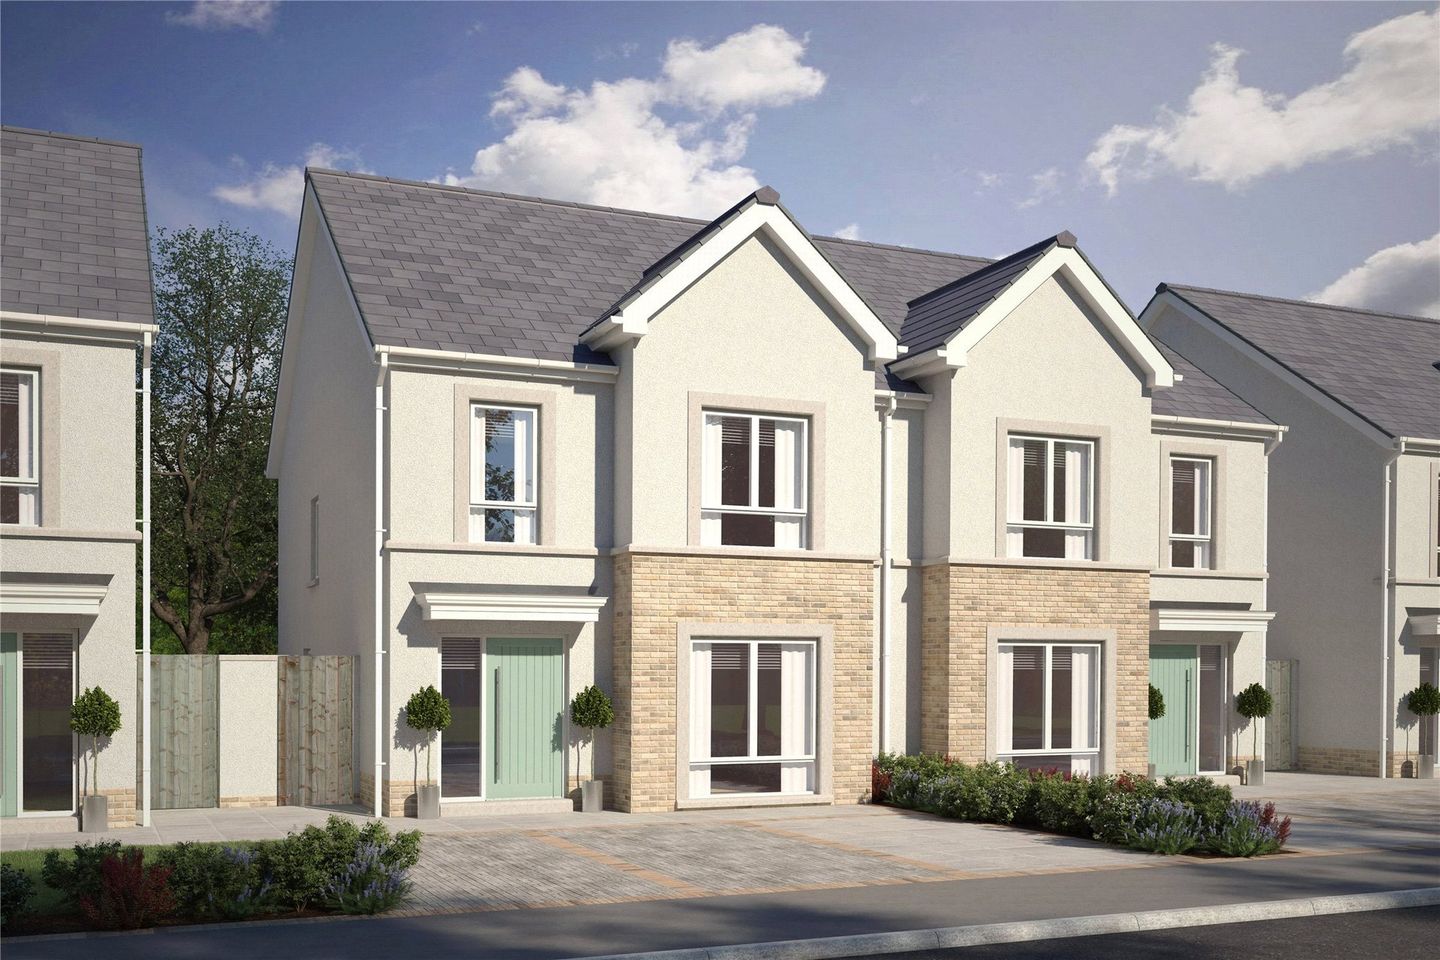 Slaney, Abbeyfields, Abbeyfields, Abbeyfields, Arden Road, Tullamore, Co. Offaly